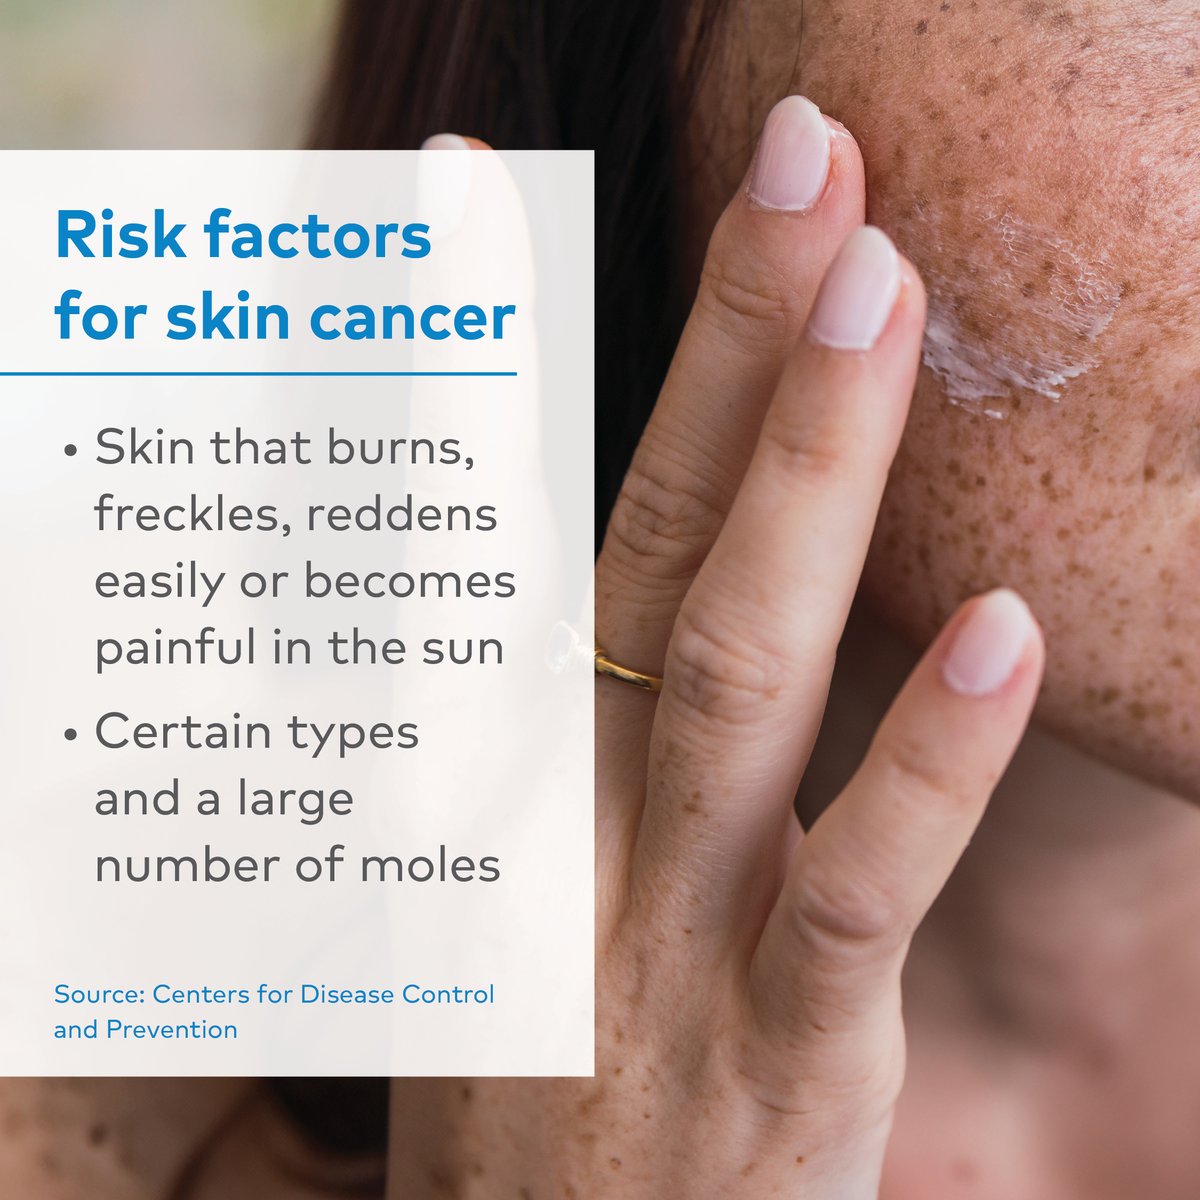 Protecting your skin goes beyond applying sunscreen! It's important to understand skin cancer risk factors. Here are some key risk factors to keep in mind. Regular skin checks and sun-safe habits are also essential. #ImproveMoreLives #SkinCancerAwareness